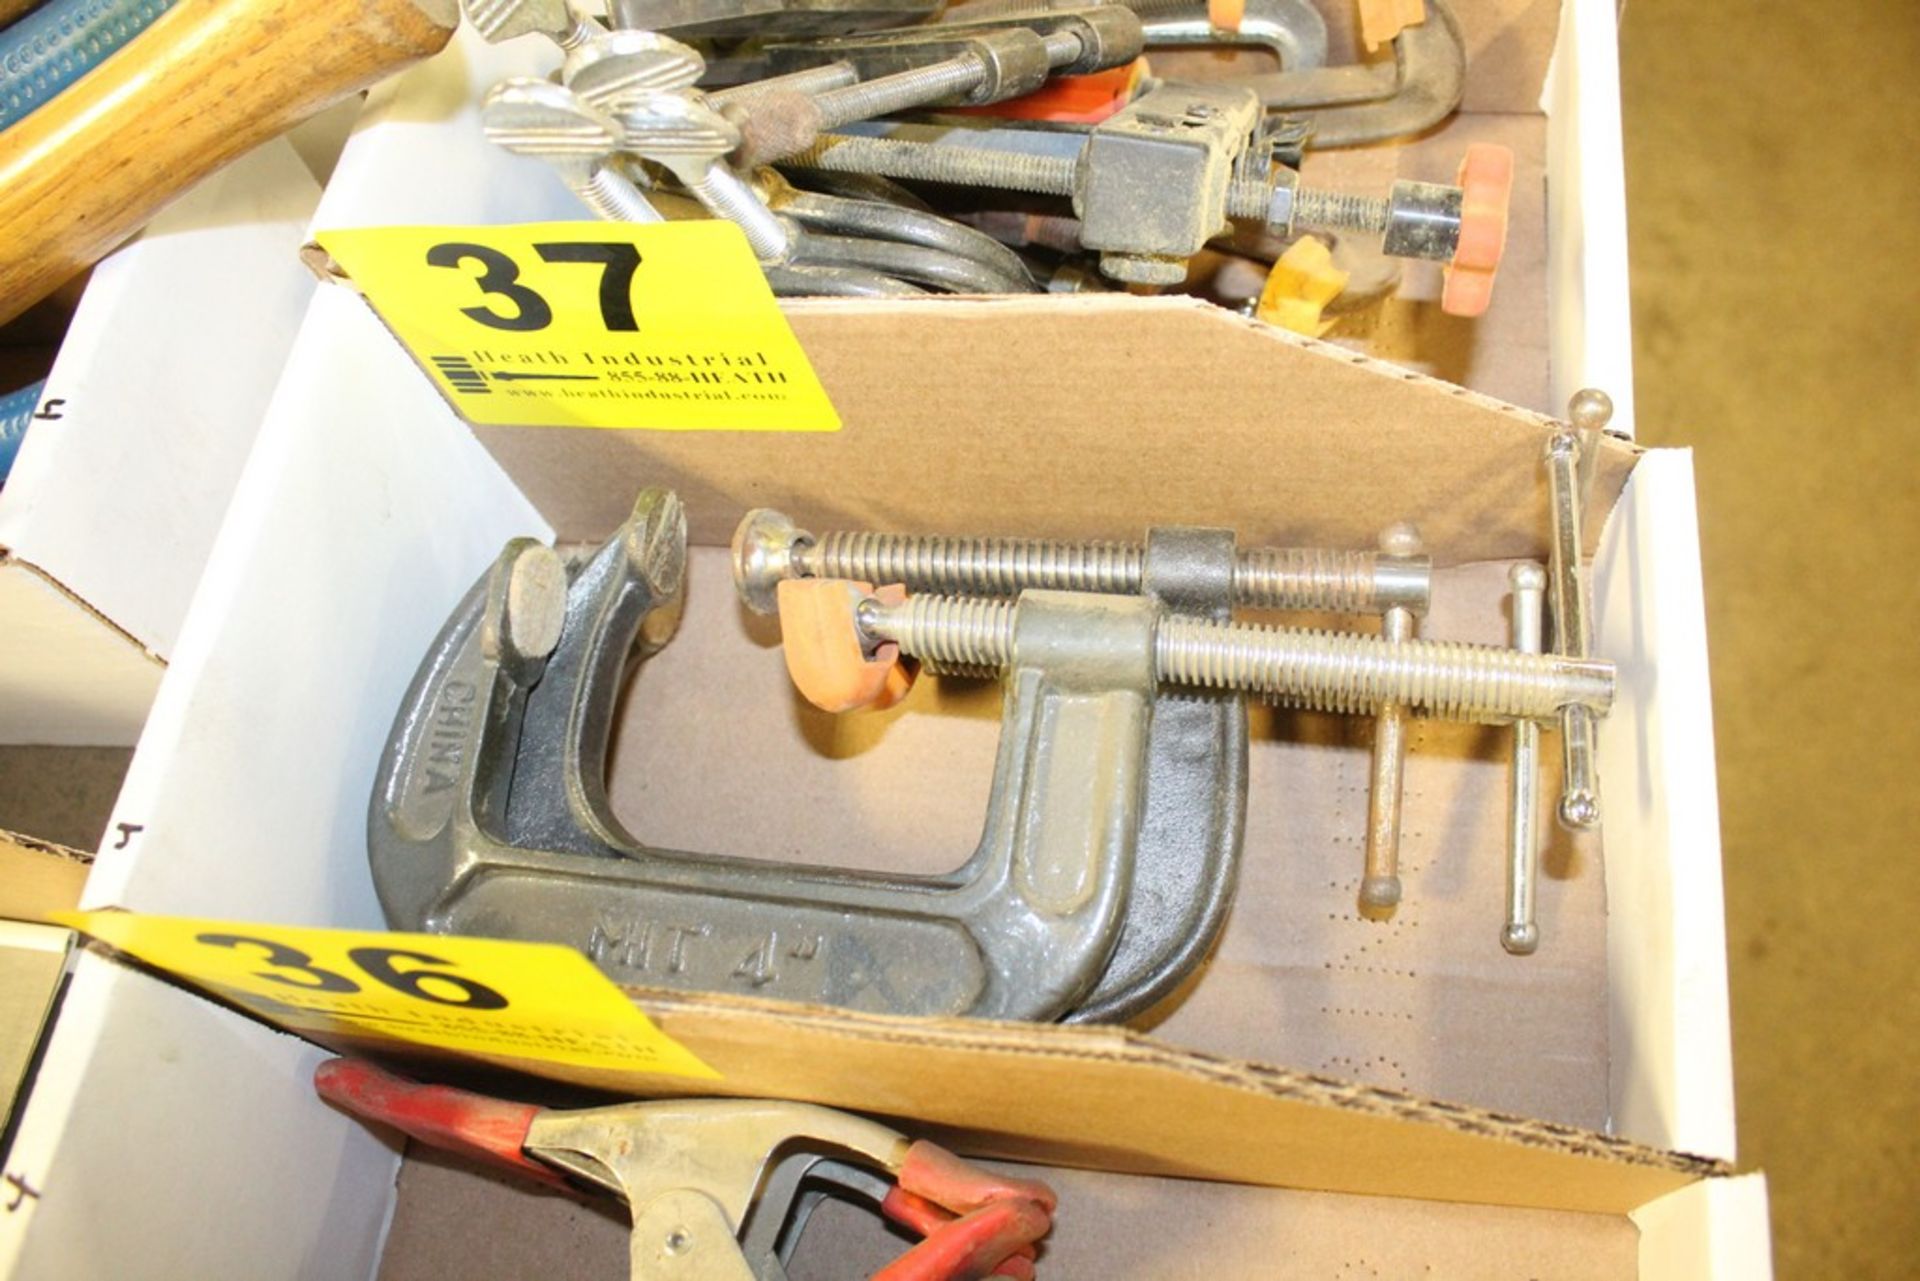 ASSORTED 4" C-CLAMPS IN BOX